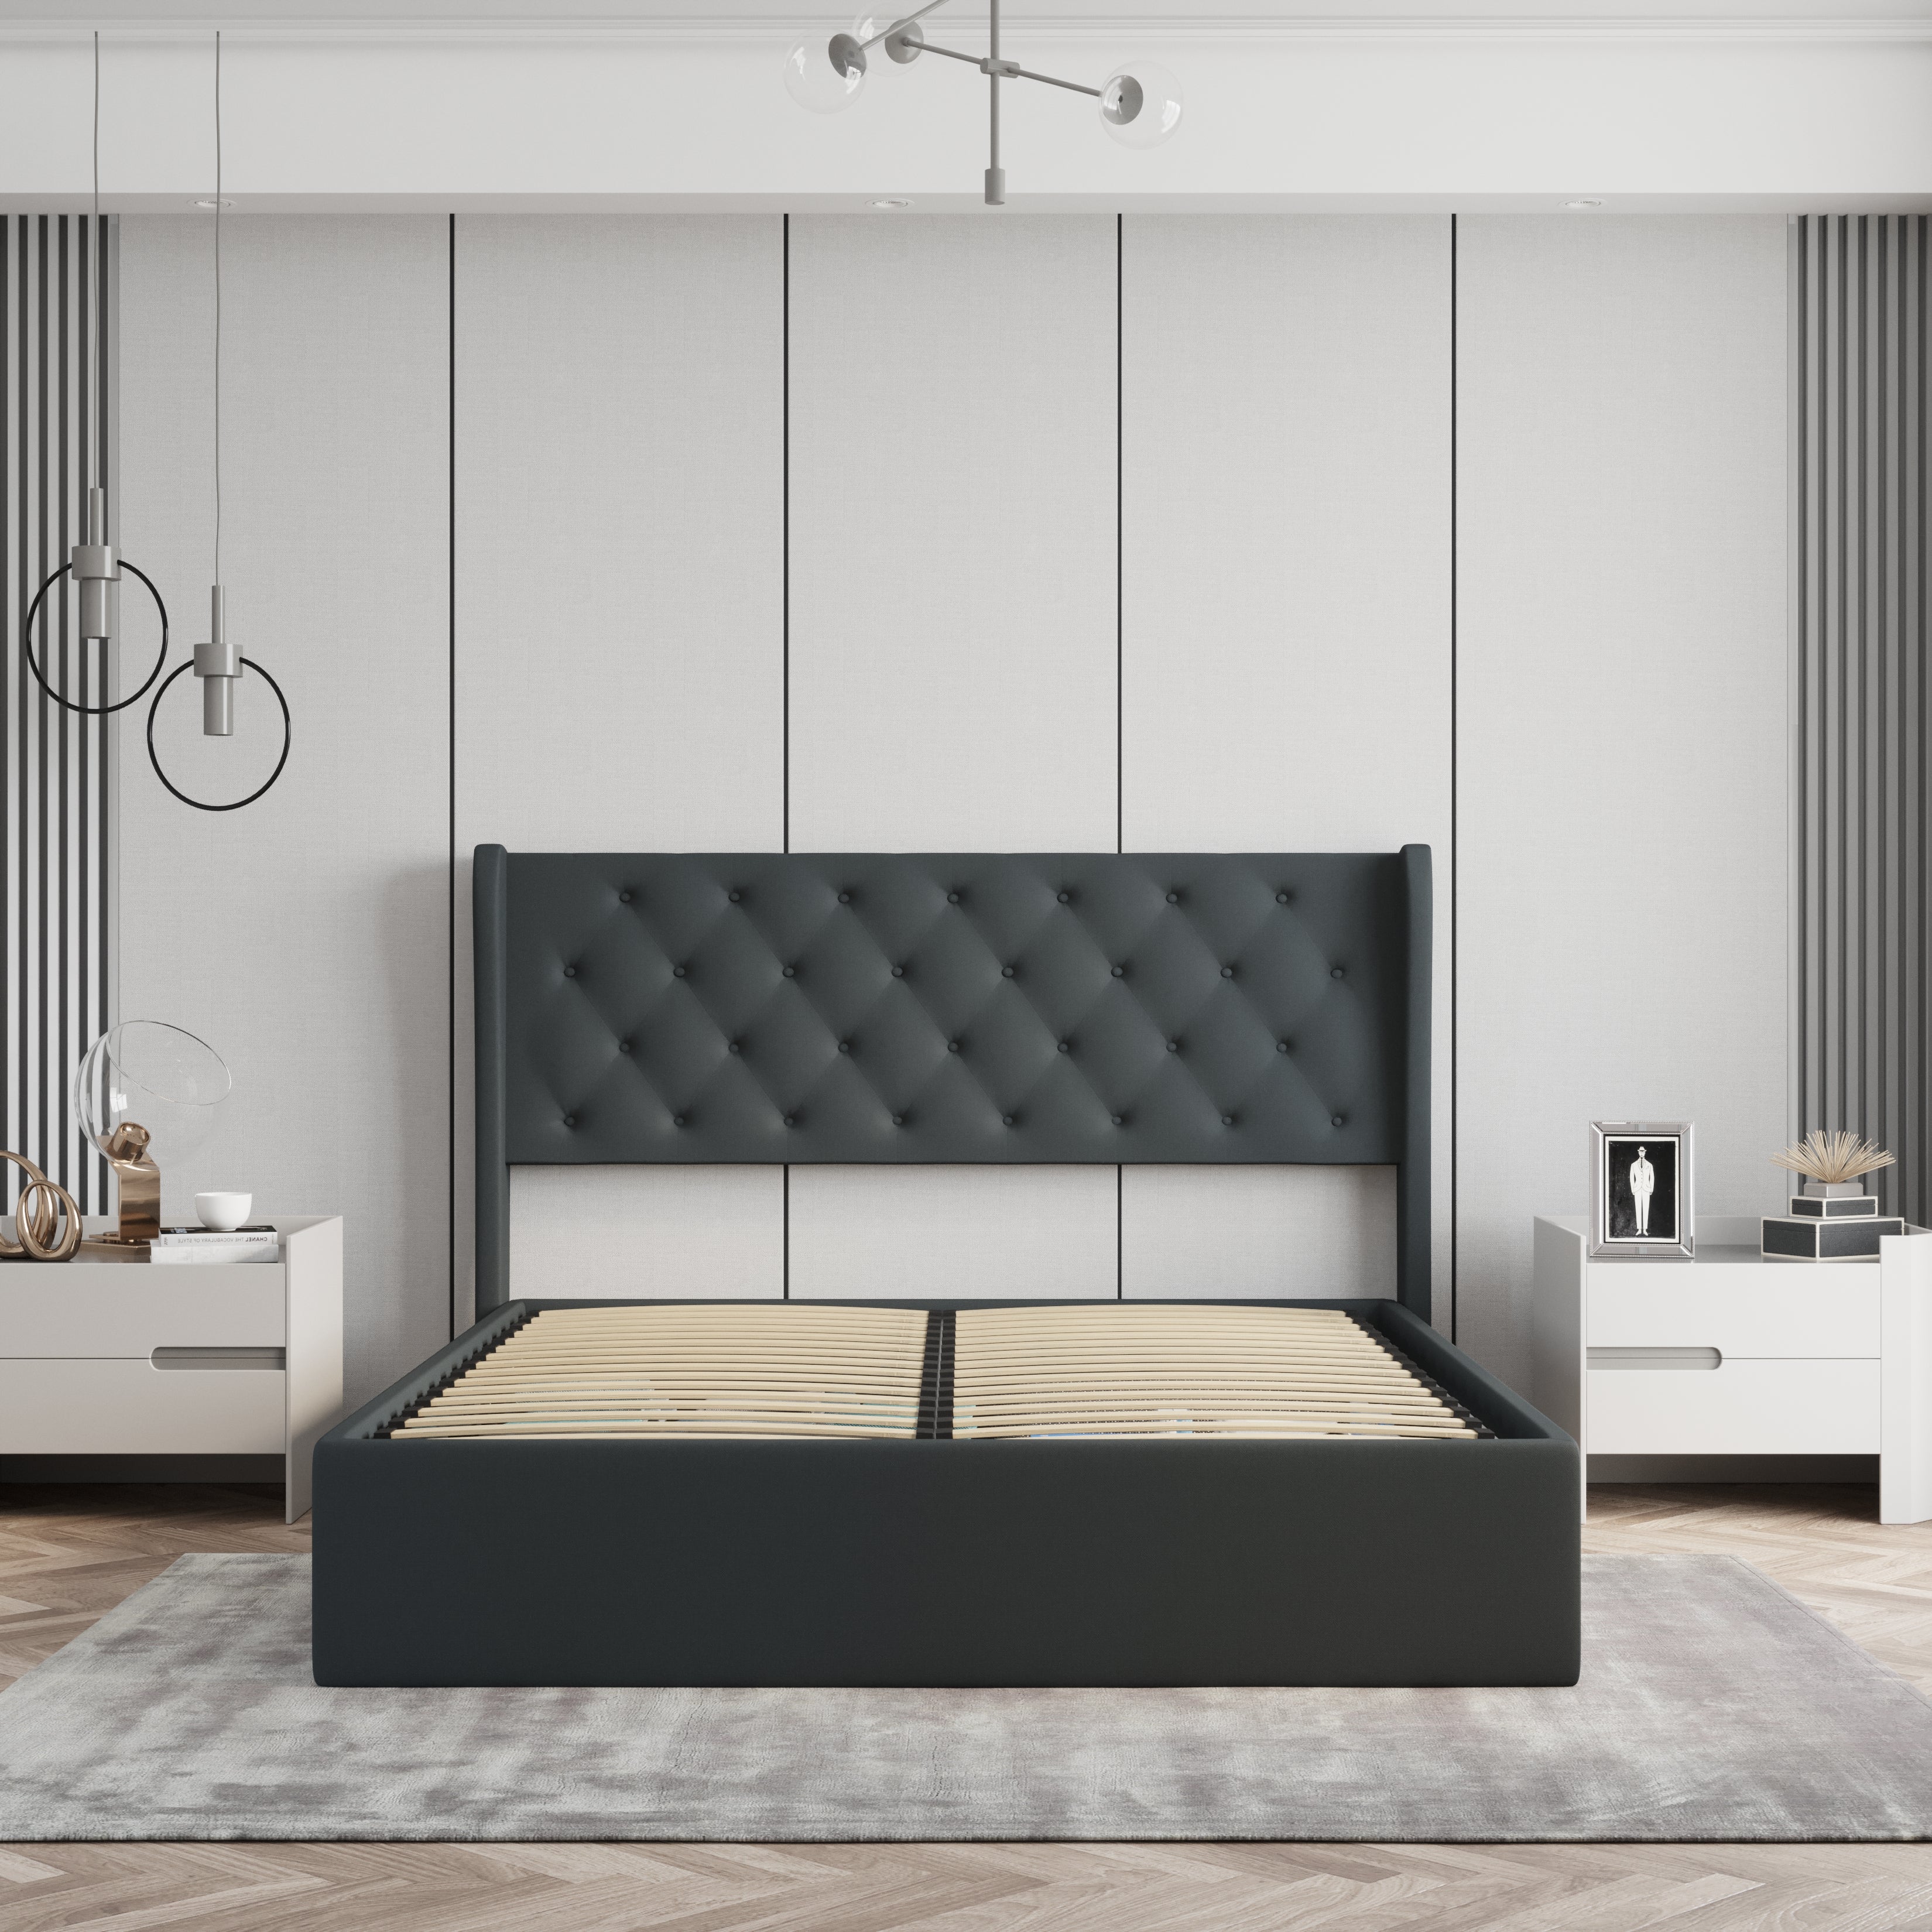 Velets Diva Contemporary Mid-Century Soft Padded Tufted Upholstered Platform Bed with Hydraulic Gas Lift Storage - Solid Wood Frame, Wood Slat System & Smart Hydraulic Under-Bed Storage - Dark Gray